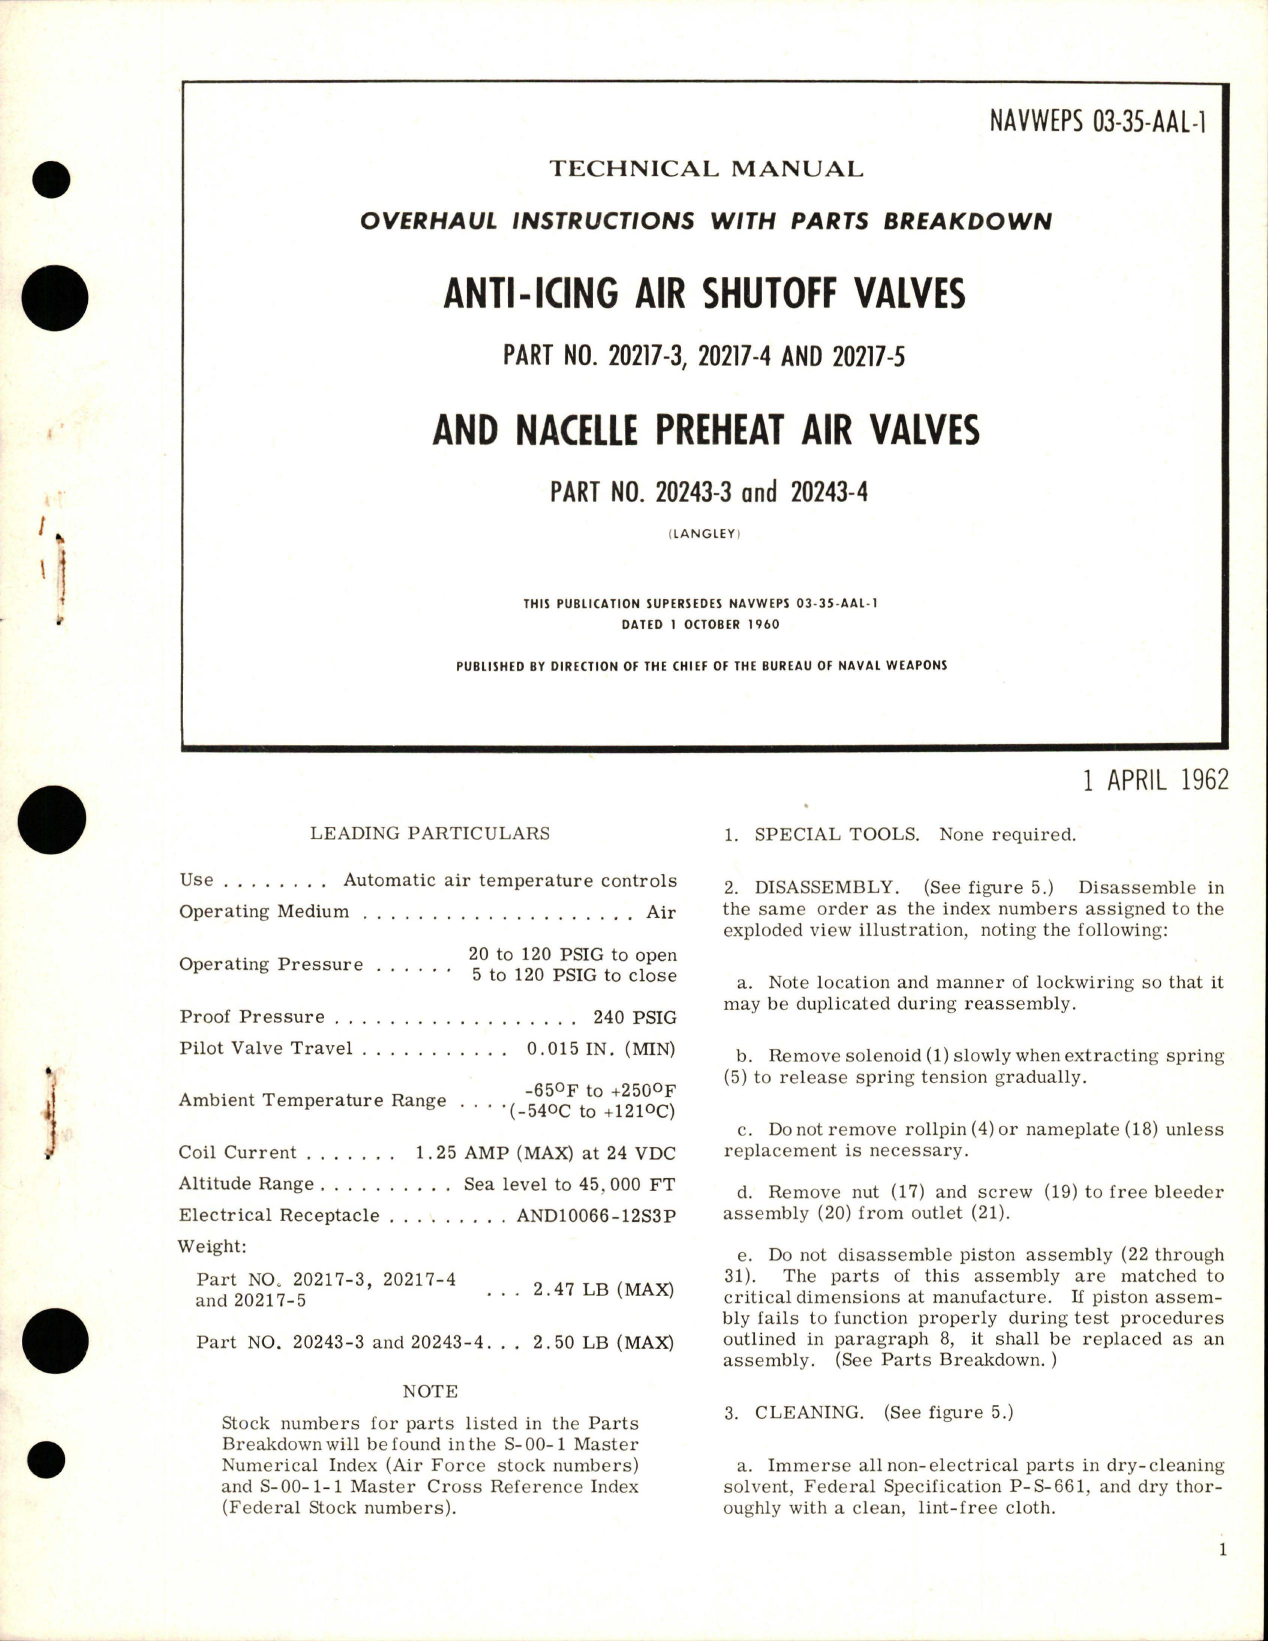 Sample page 1 from AirCorps Library document: Overhaul Instructions with Parts Breakdown for Anti-Icing Air Shutoff and Nacelle Preheat Air Valves